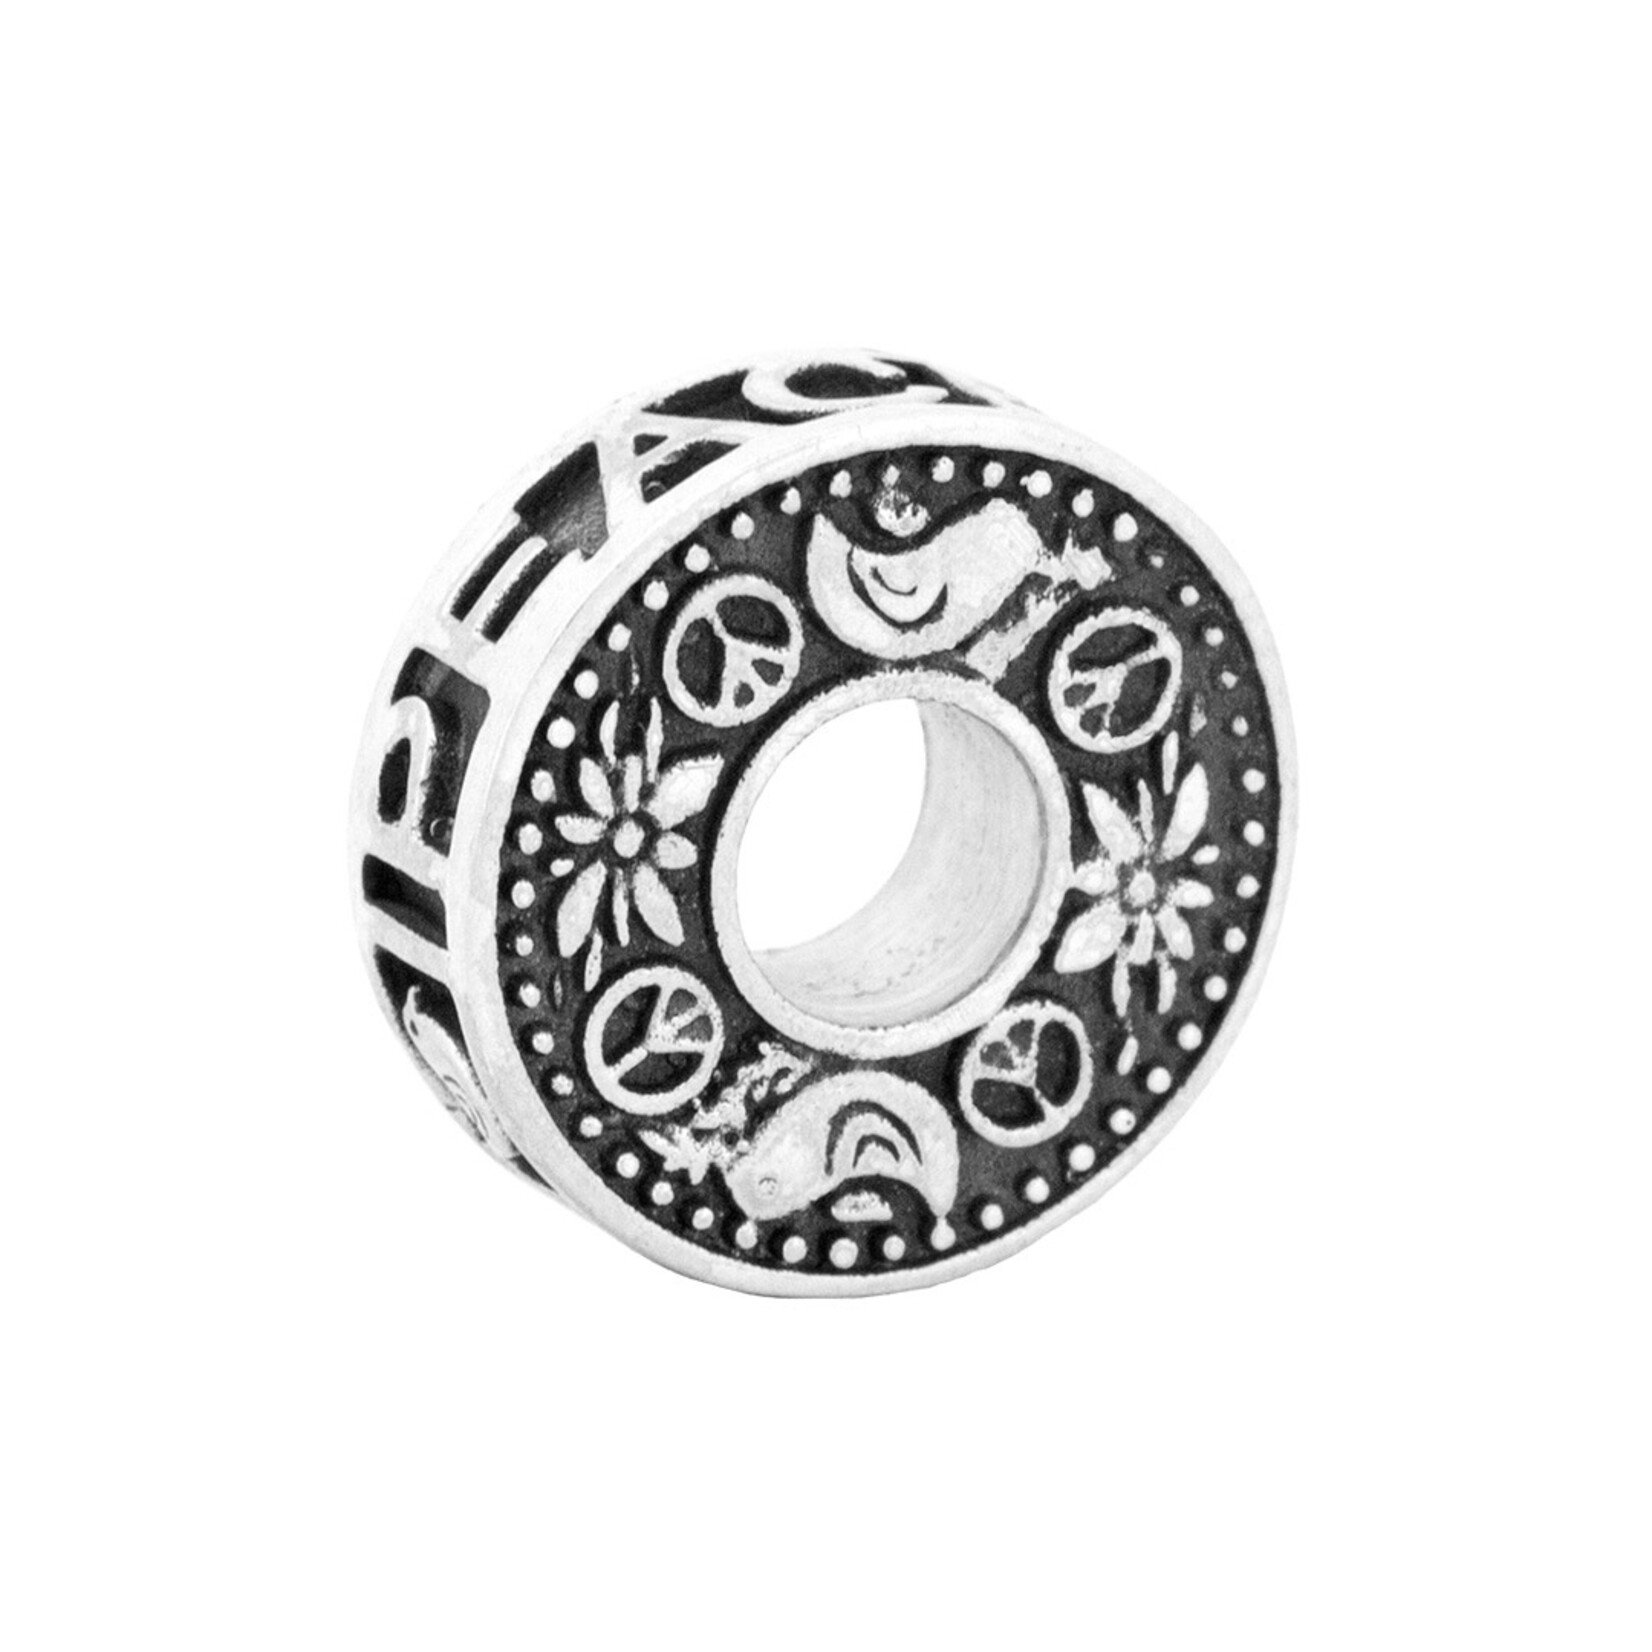 Black Raven Beads  Black Raven Beads Wish Coin Peace BRS034